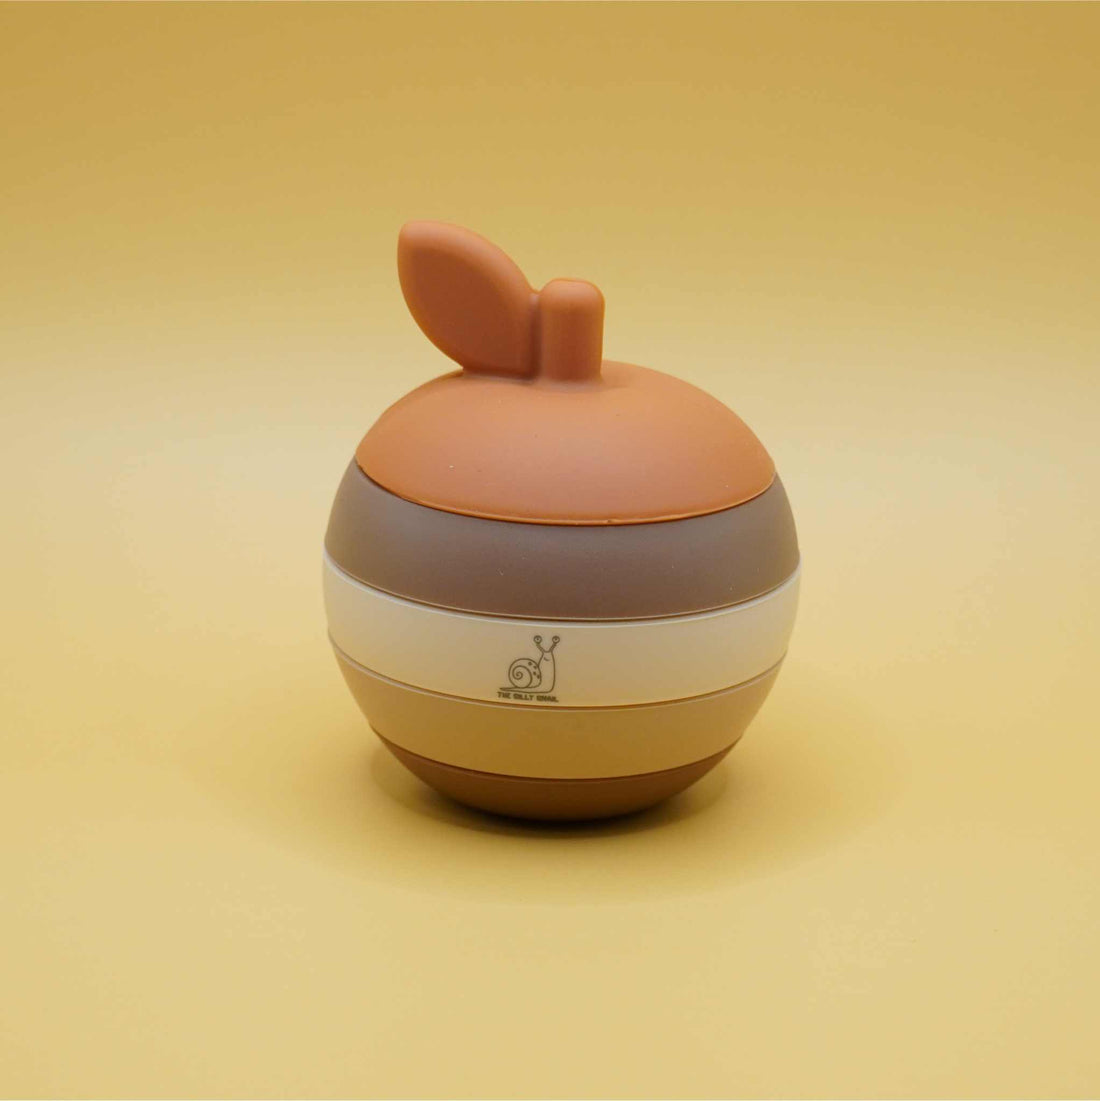 artistic apple shaped silicone stacking toy